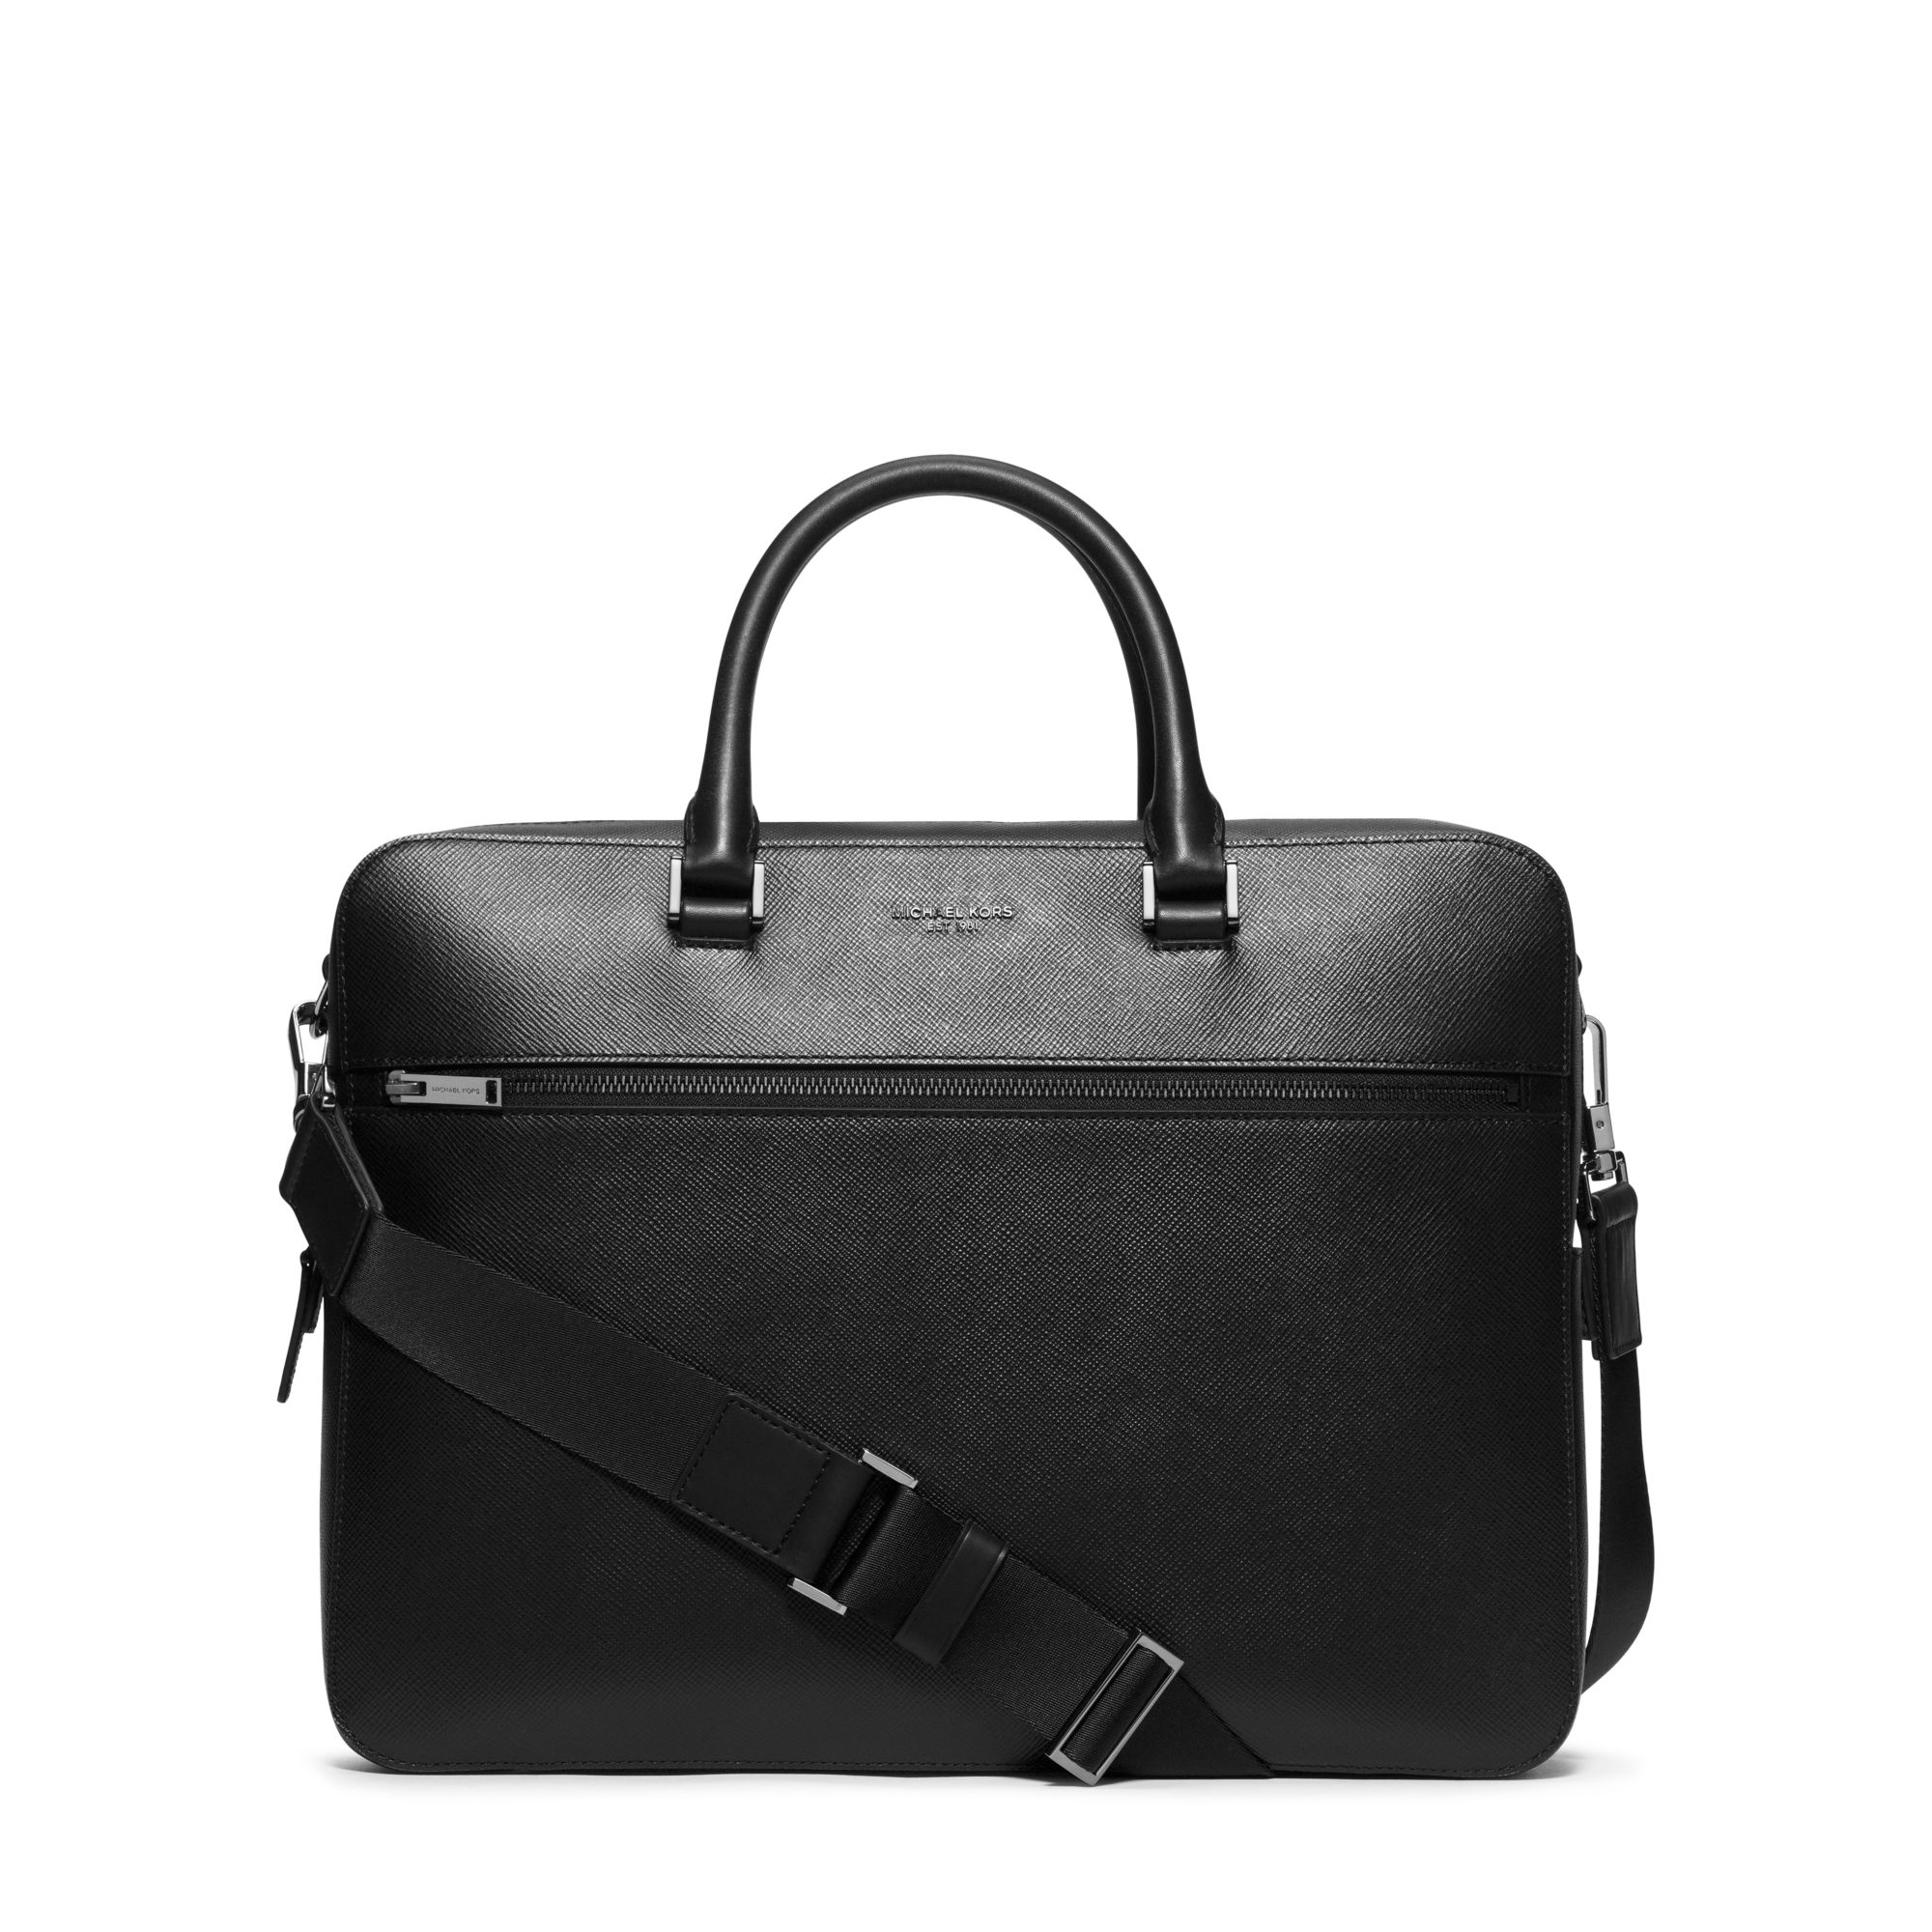 Lyst - Michael Kors Harrison Large Leather Briefcase in Black for Men